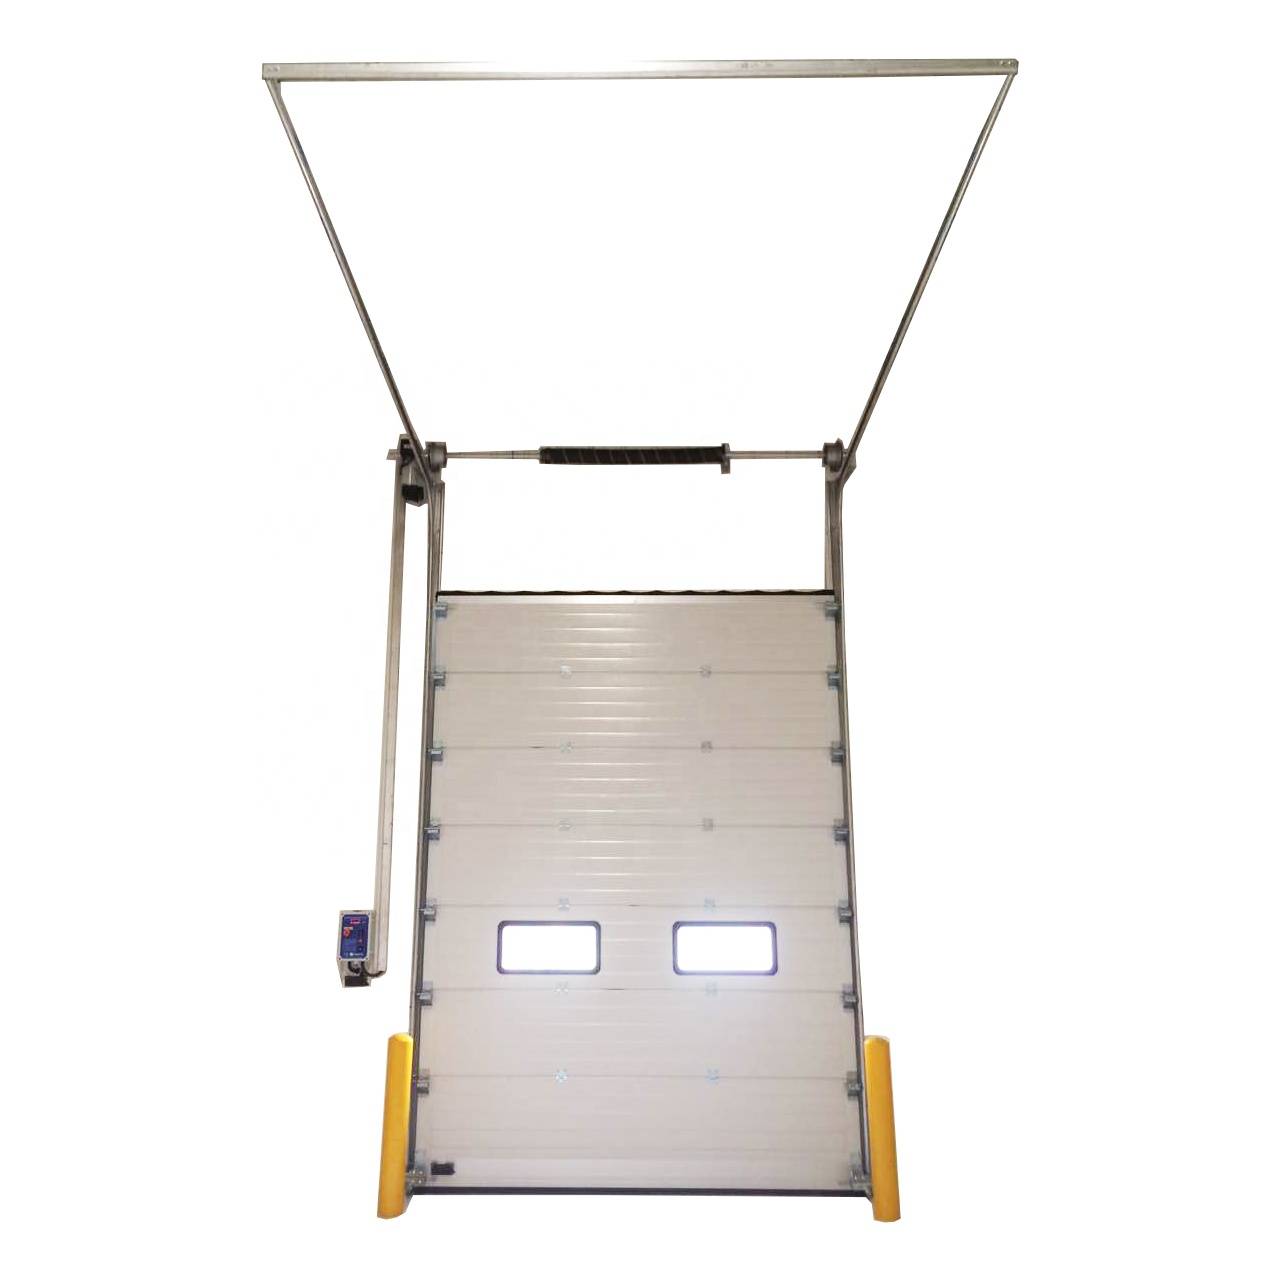 The main components of the balance system device of the industrial sliding door